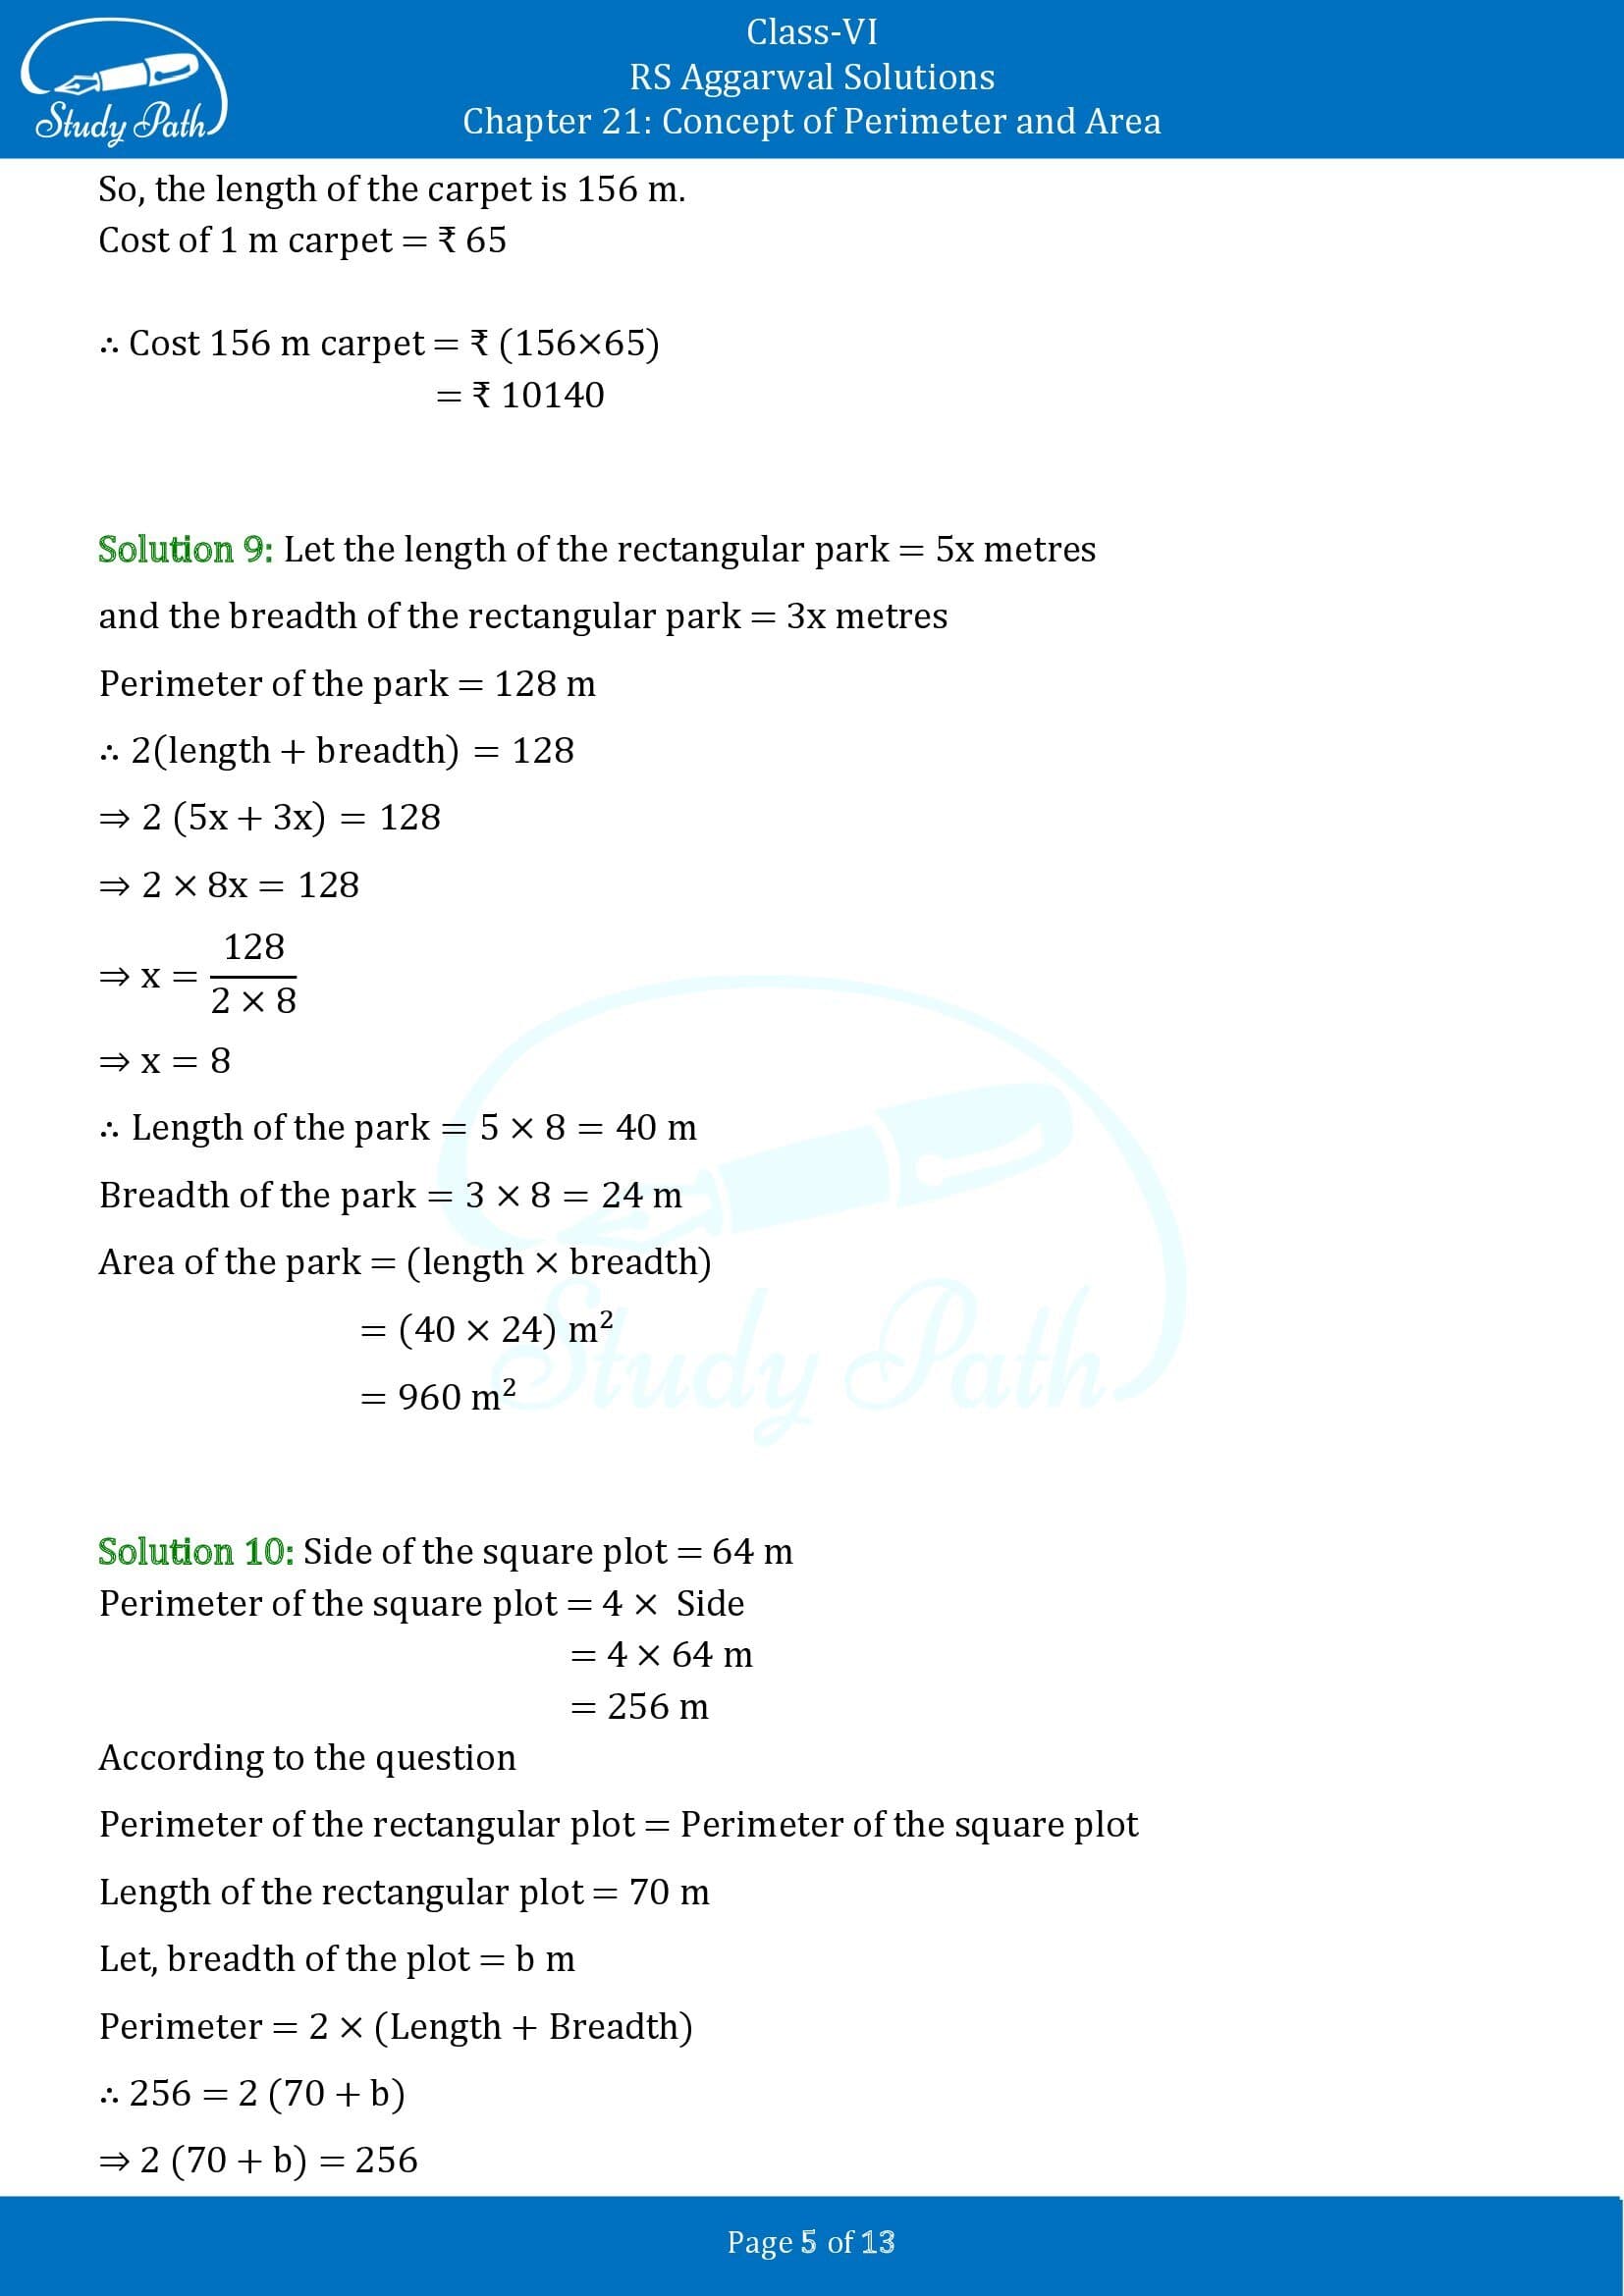 RS Aggarwal Solutions Class 6 Chapter 21 Concept of Perimeter and Area Exercise 21D 00005